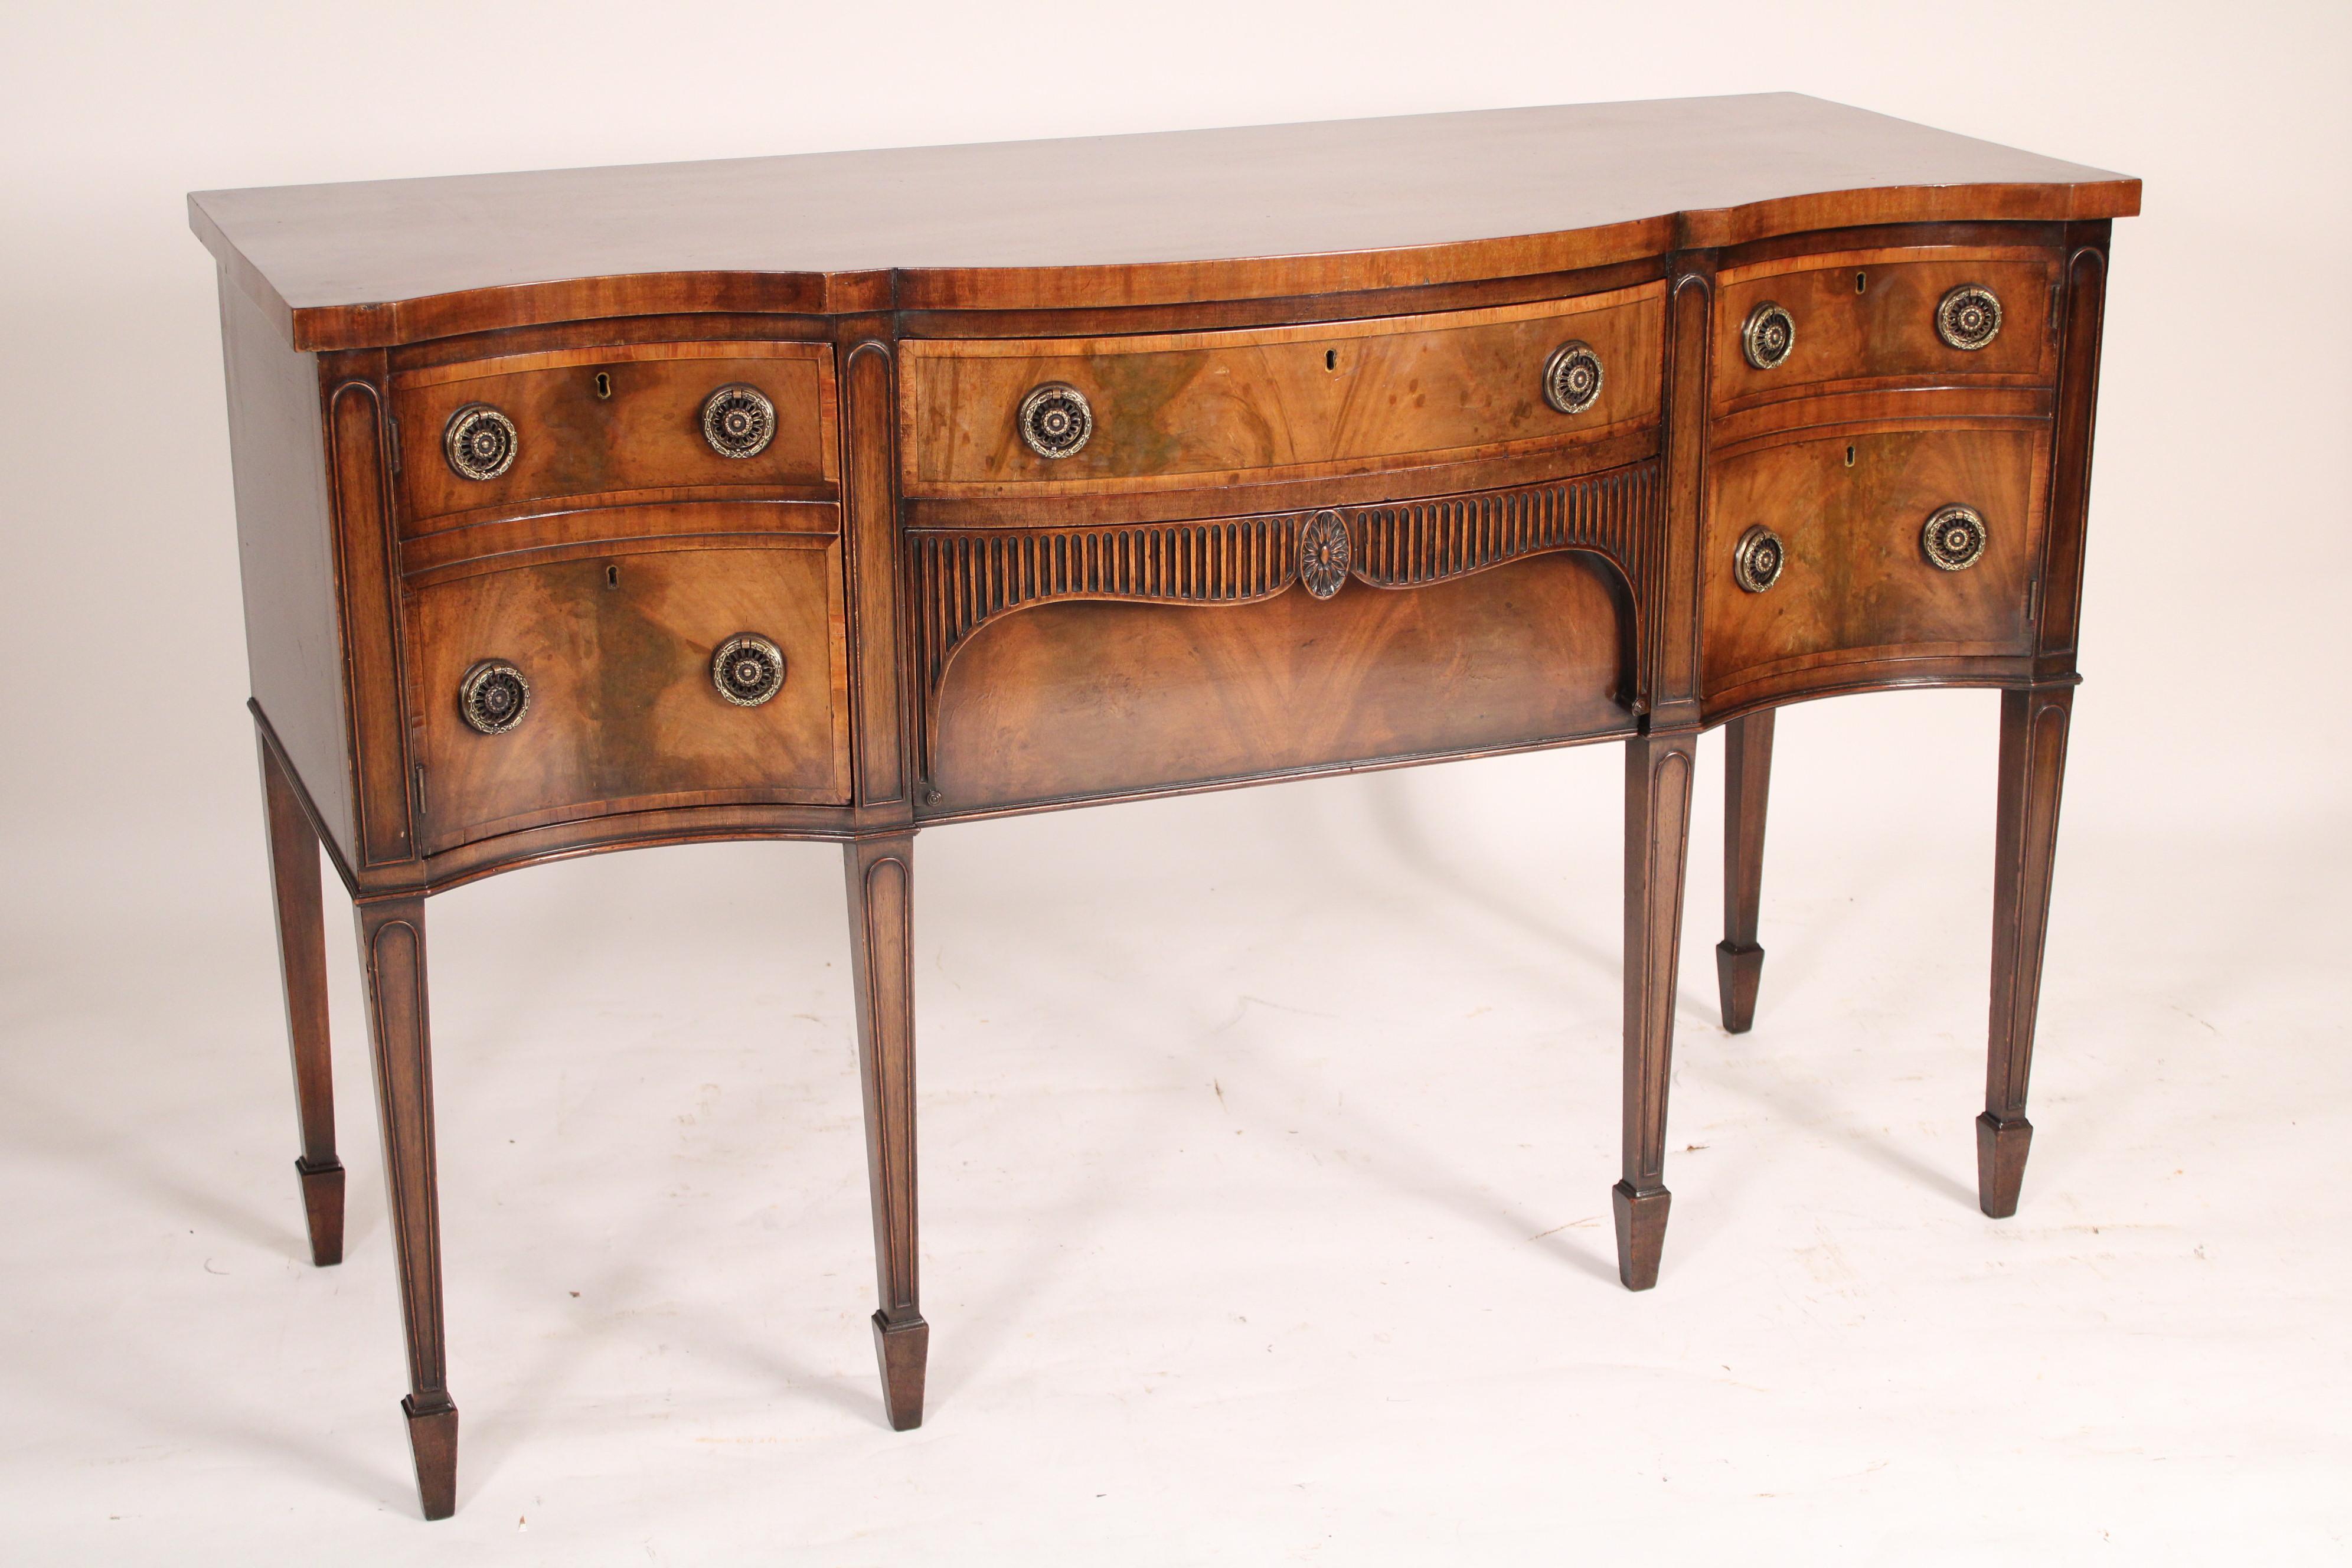 Antique George III style mahogany sideboard, late 19th century. The top with a serpentine shaped front, over two central drawers flanked by two doors all with cross banding, resting on square tapered molded legs ending in spade feet. Exquisite